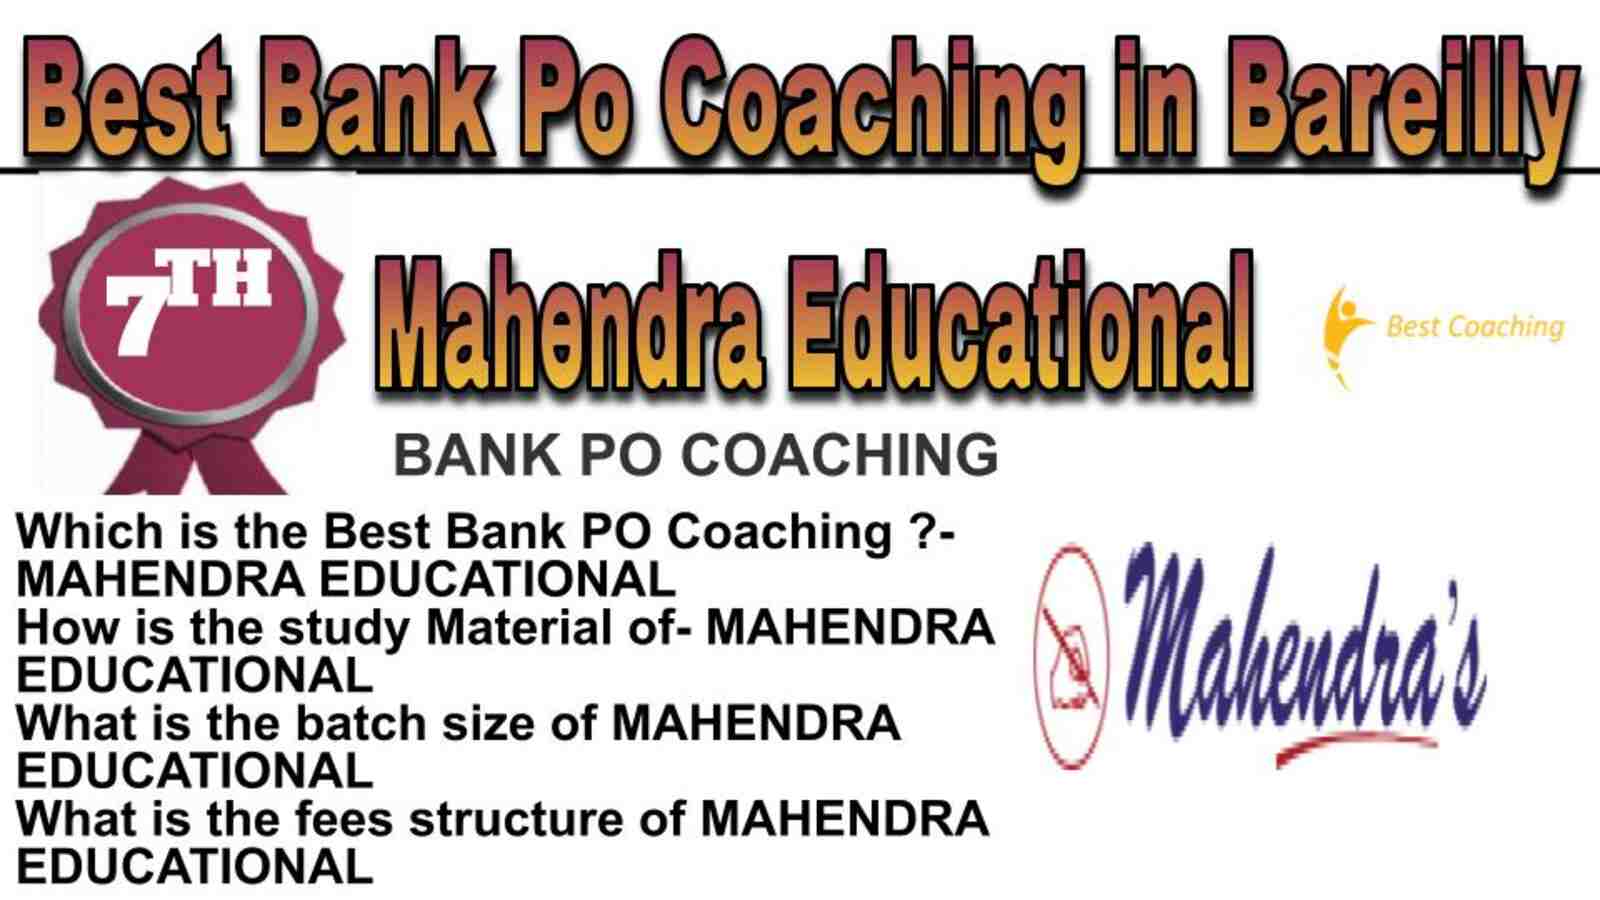 Rank 7 best bank po coaching in Bareilly